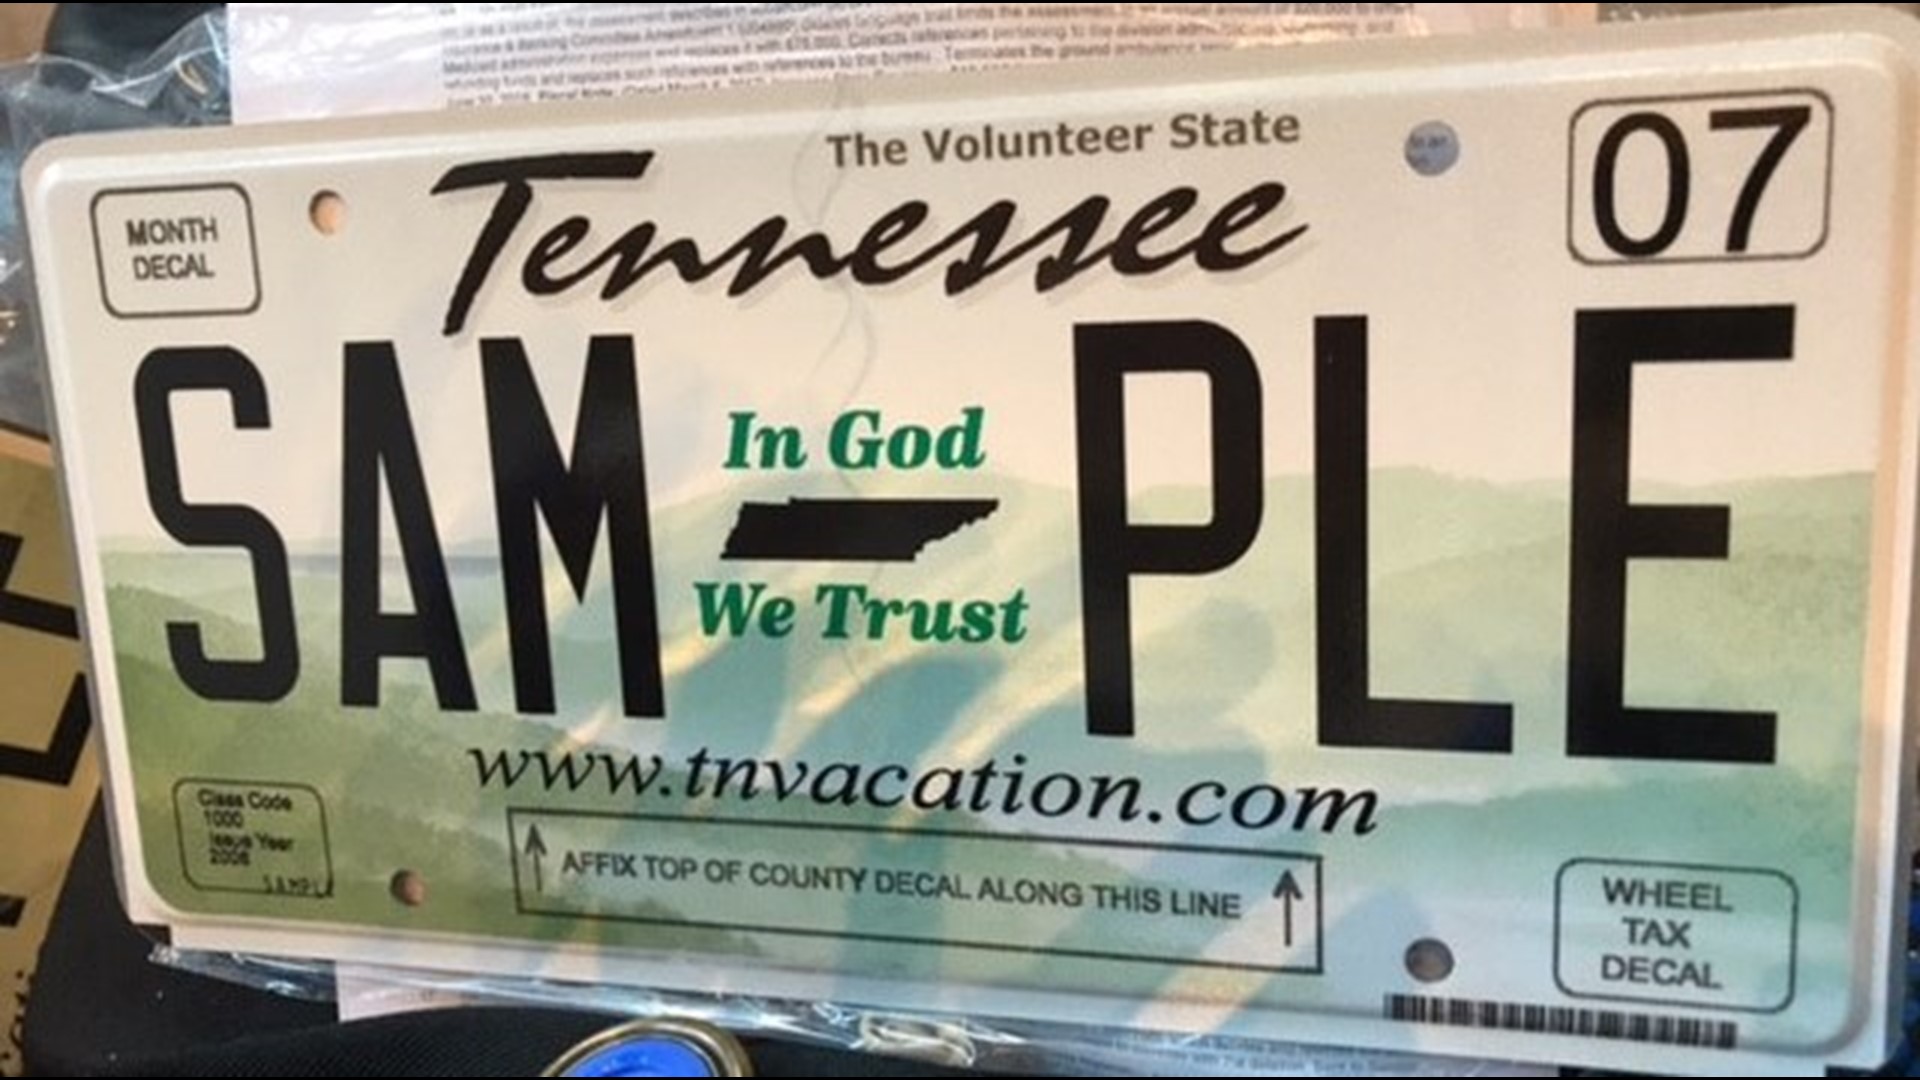 License plate renewal deadlines extended for TN